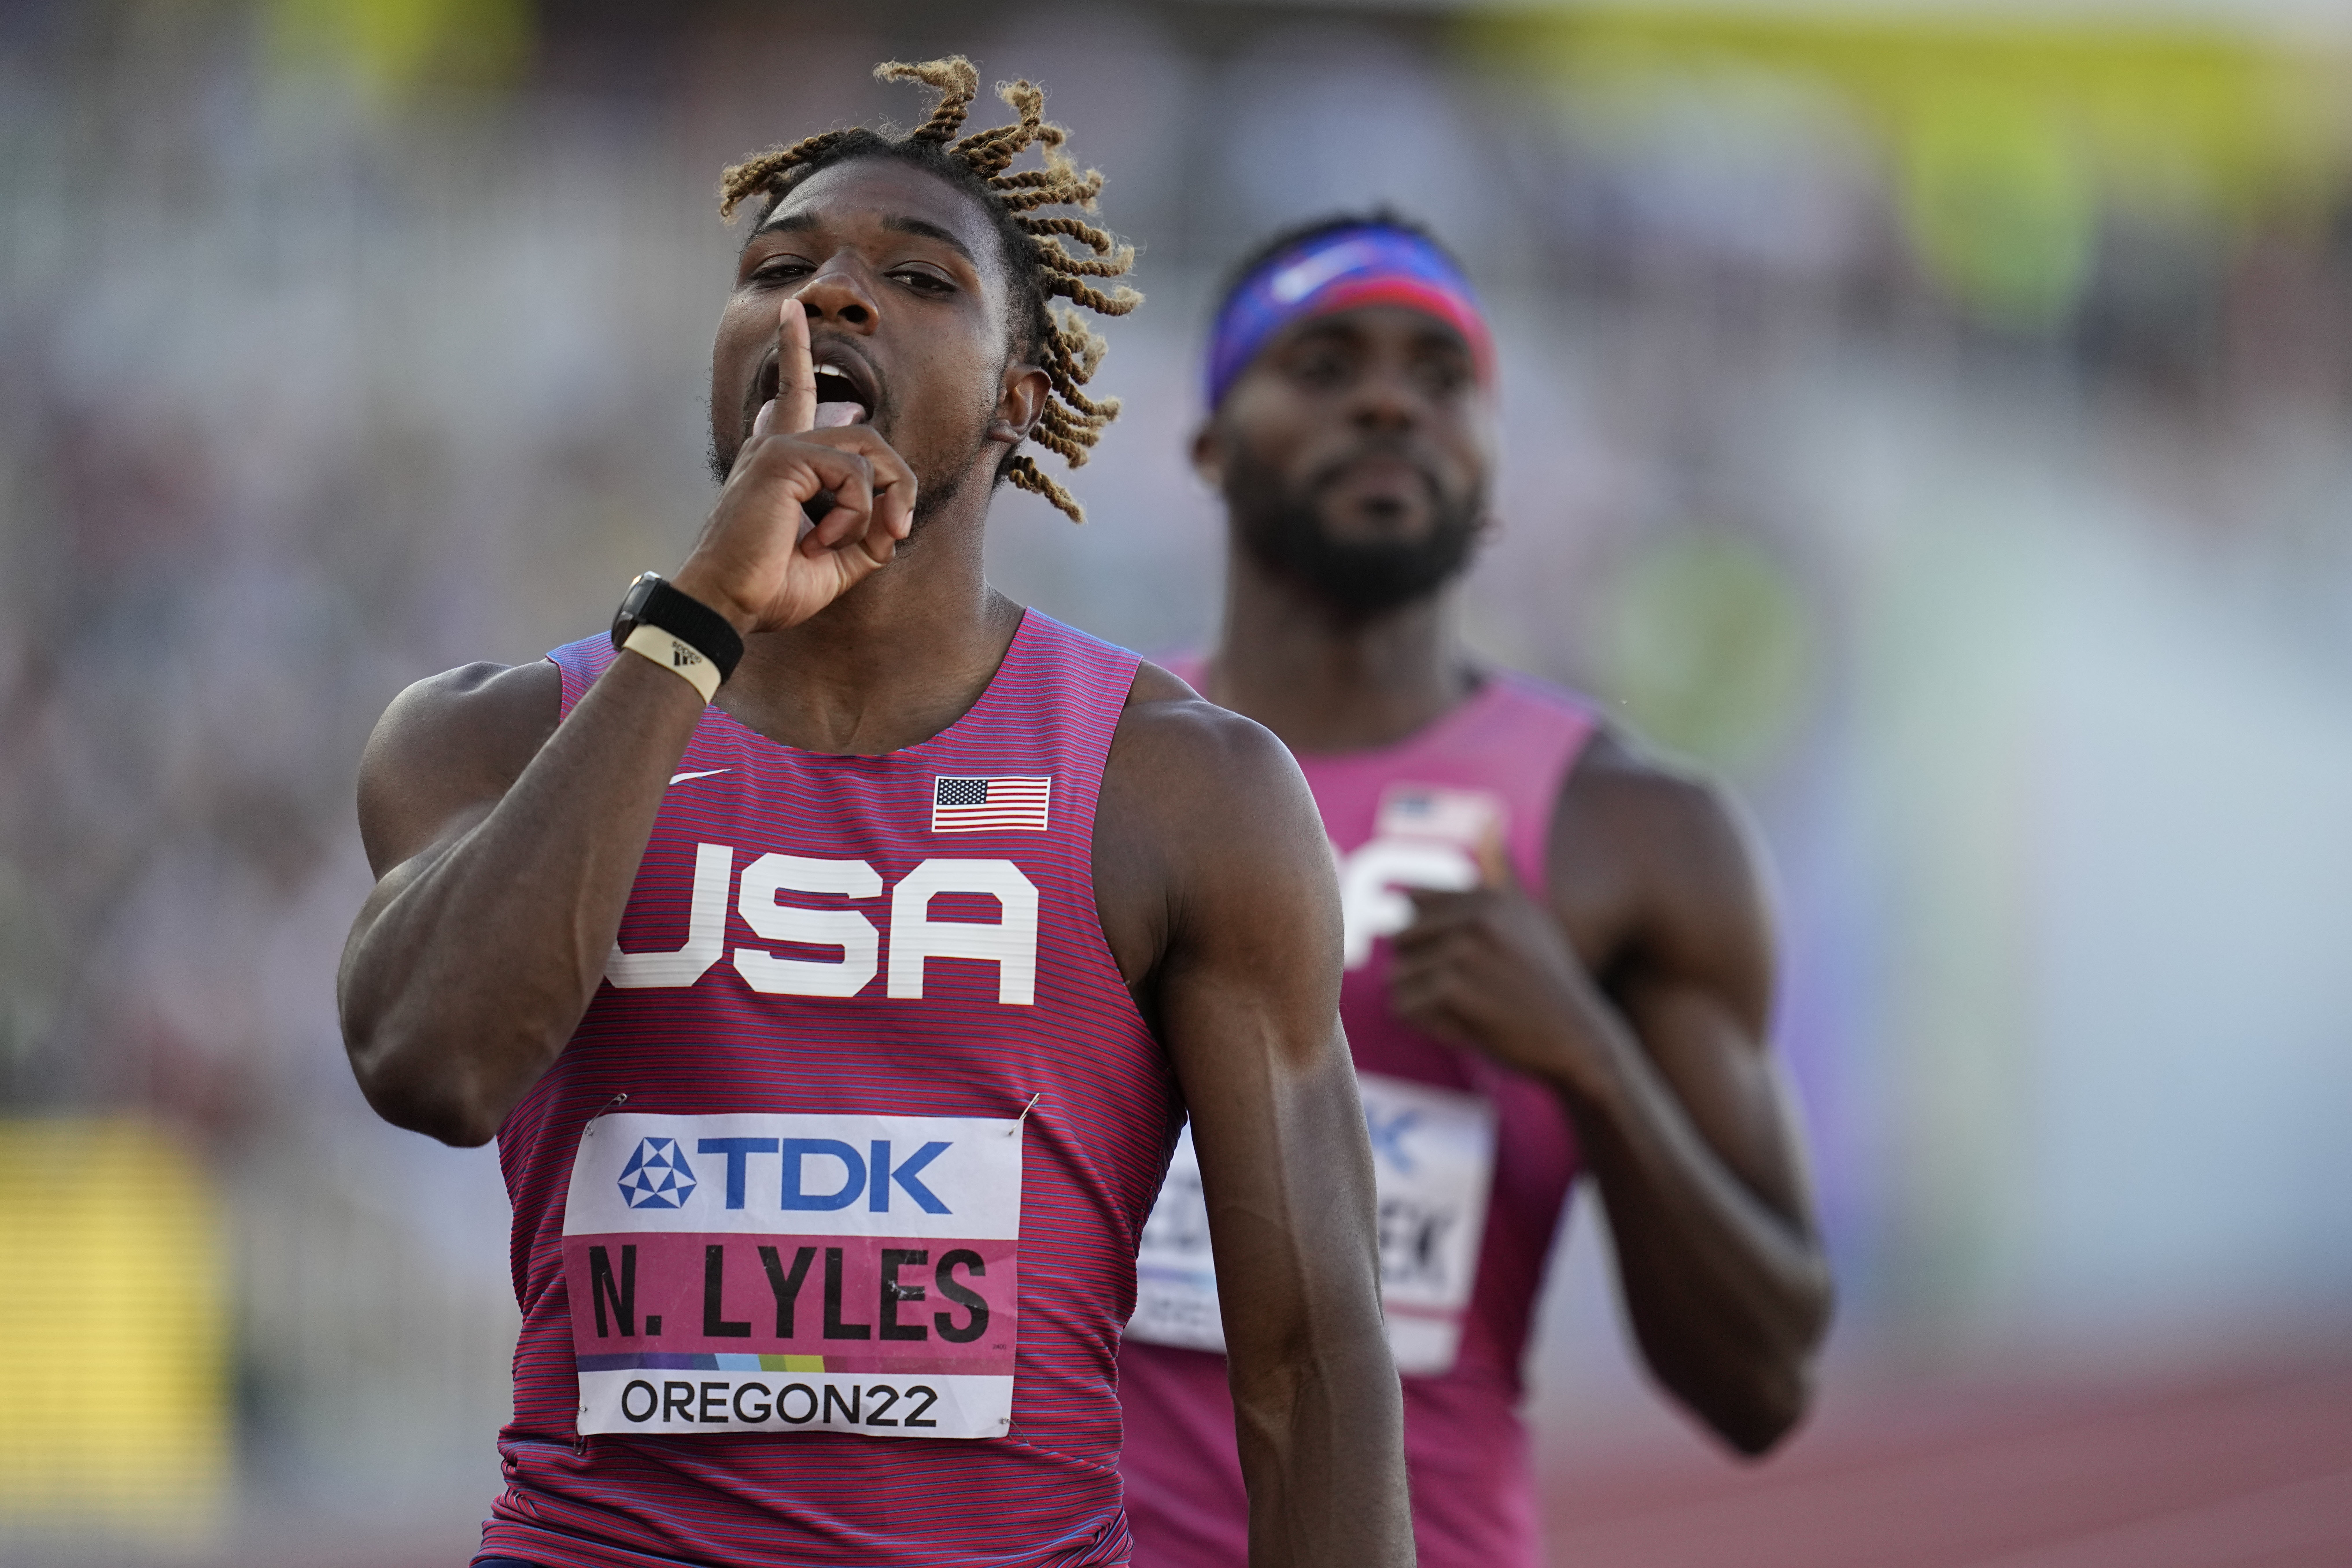 Recapping Day 7 at World Athletics Championships, what to watch on Friday